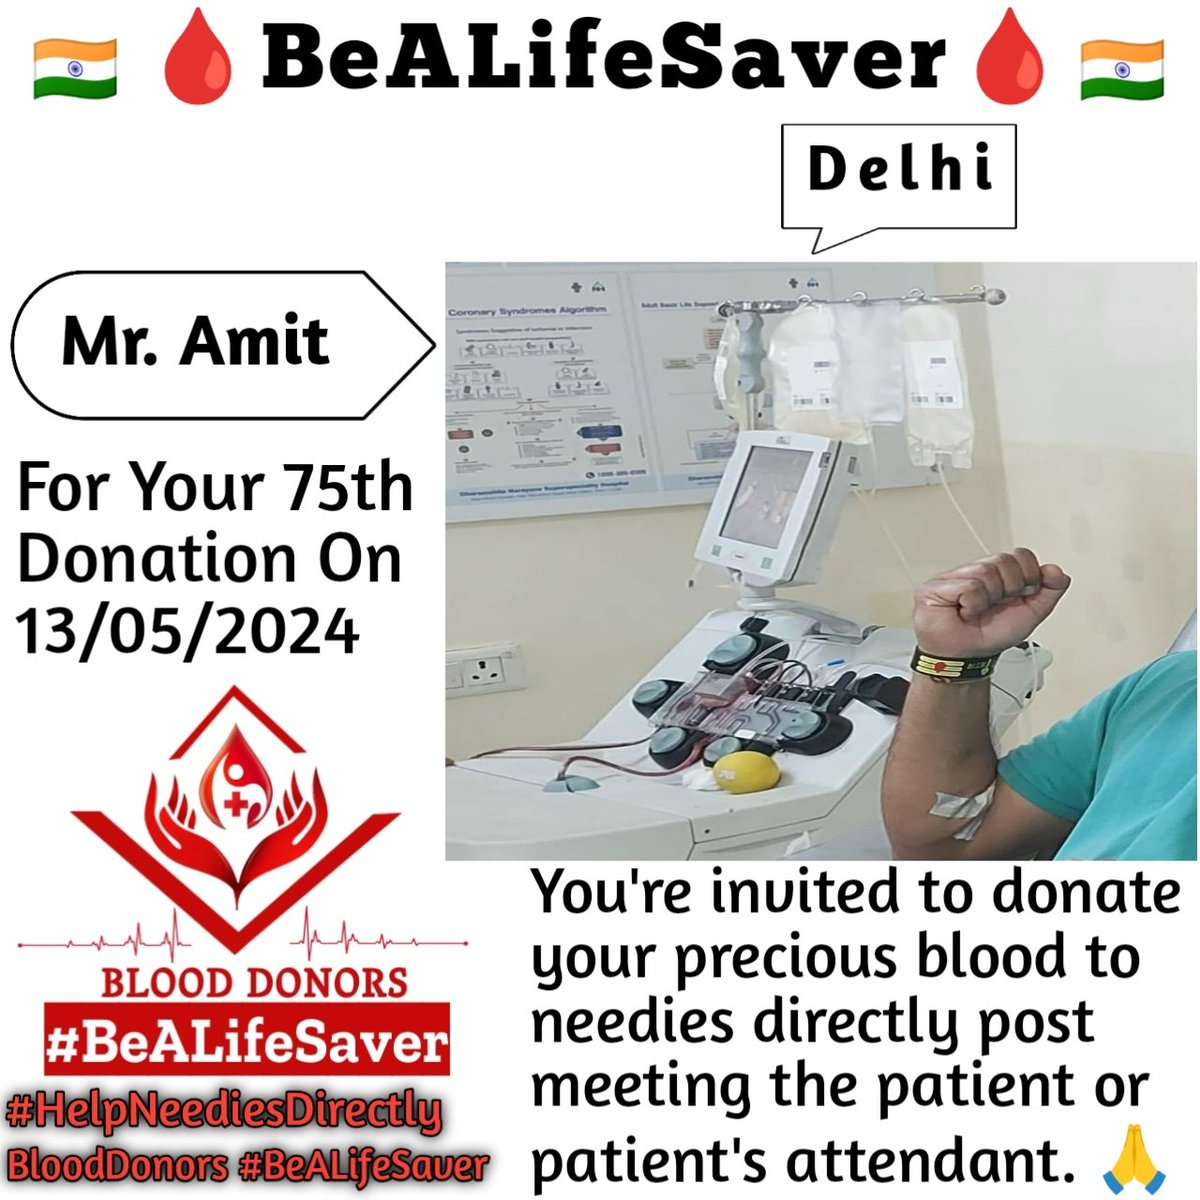 🙏 Congrats For 75th Blood Donation 🙏
Delhi BeALifeSaver
Kudos_Mr_Amit_Ji

Today's hero
Mr. Amit Ji donated blood in Delhi for the 75th Time for one of the needies. Heartfelt Gratitude and Respect to Amit Ji for his blood donation for Patient admitted in Delhi.